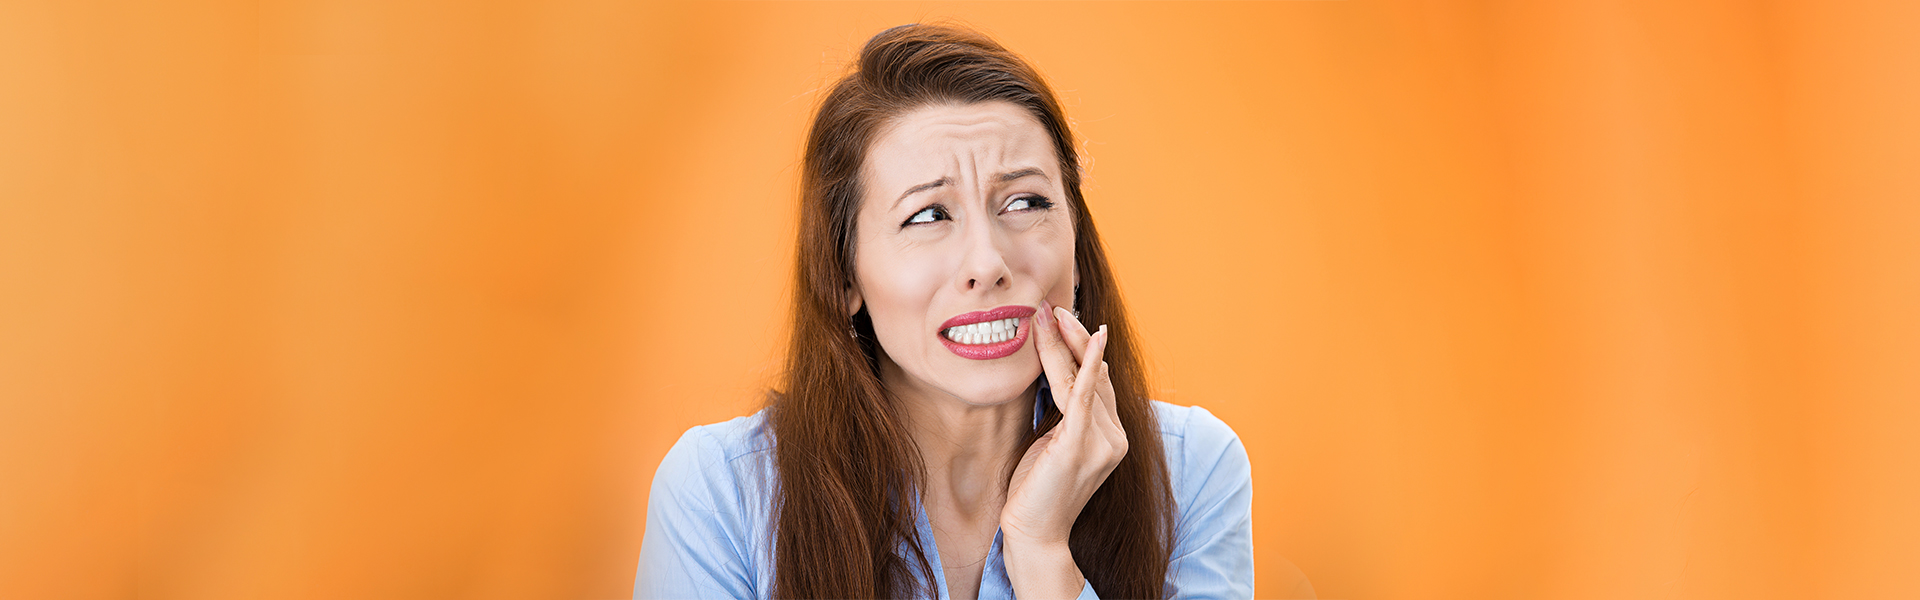 Could the Dental Issue You Have Be An Emergency? Here’s How You Can Tell